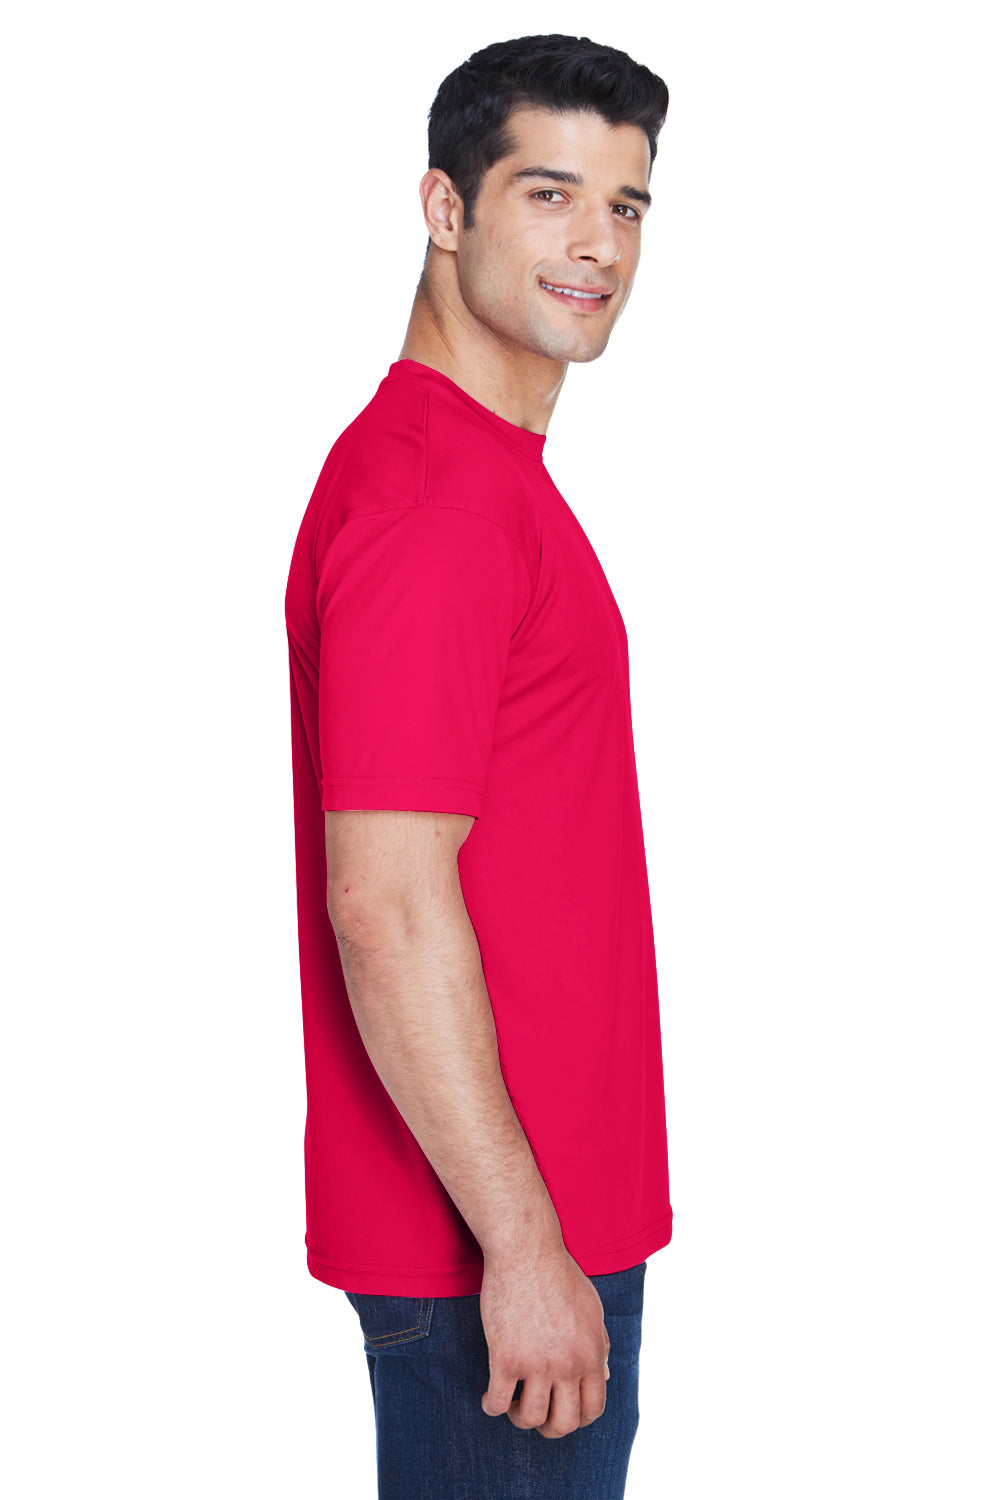 UltraClub 8420 Mens Cool & Dry Performance Moisture Wicking Short Sleeve Crewneck T-Shirt Red Side